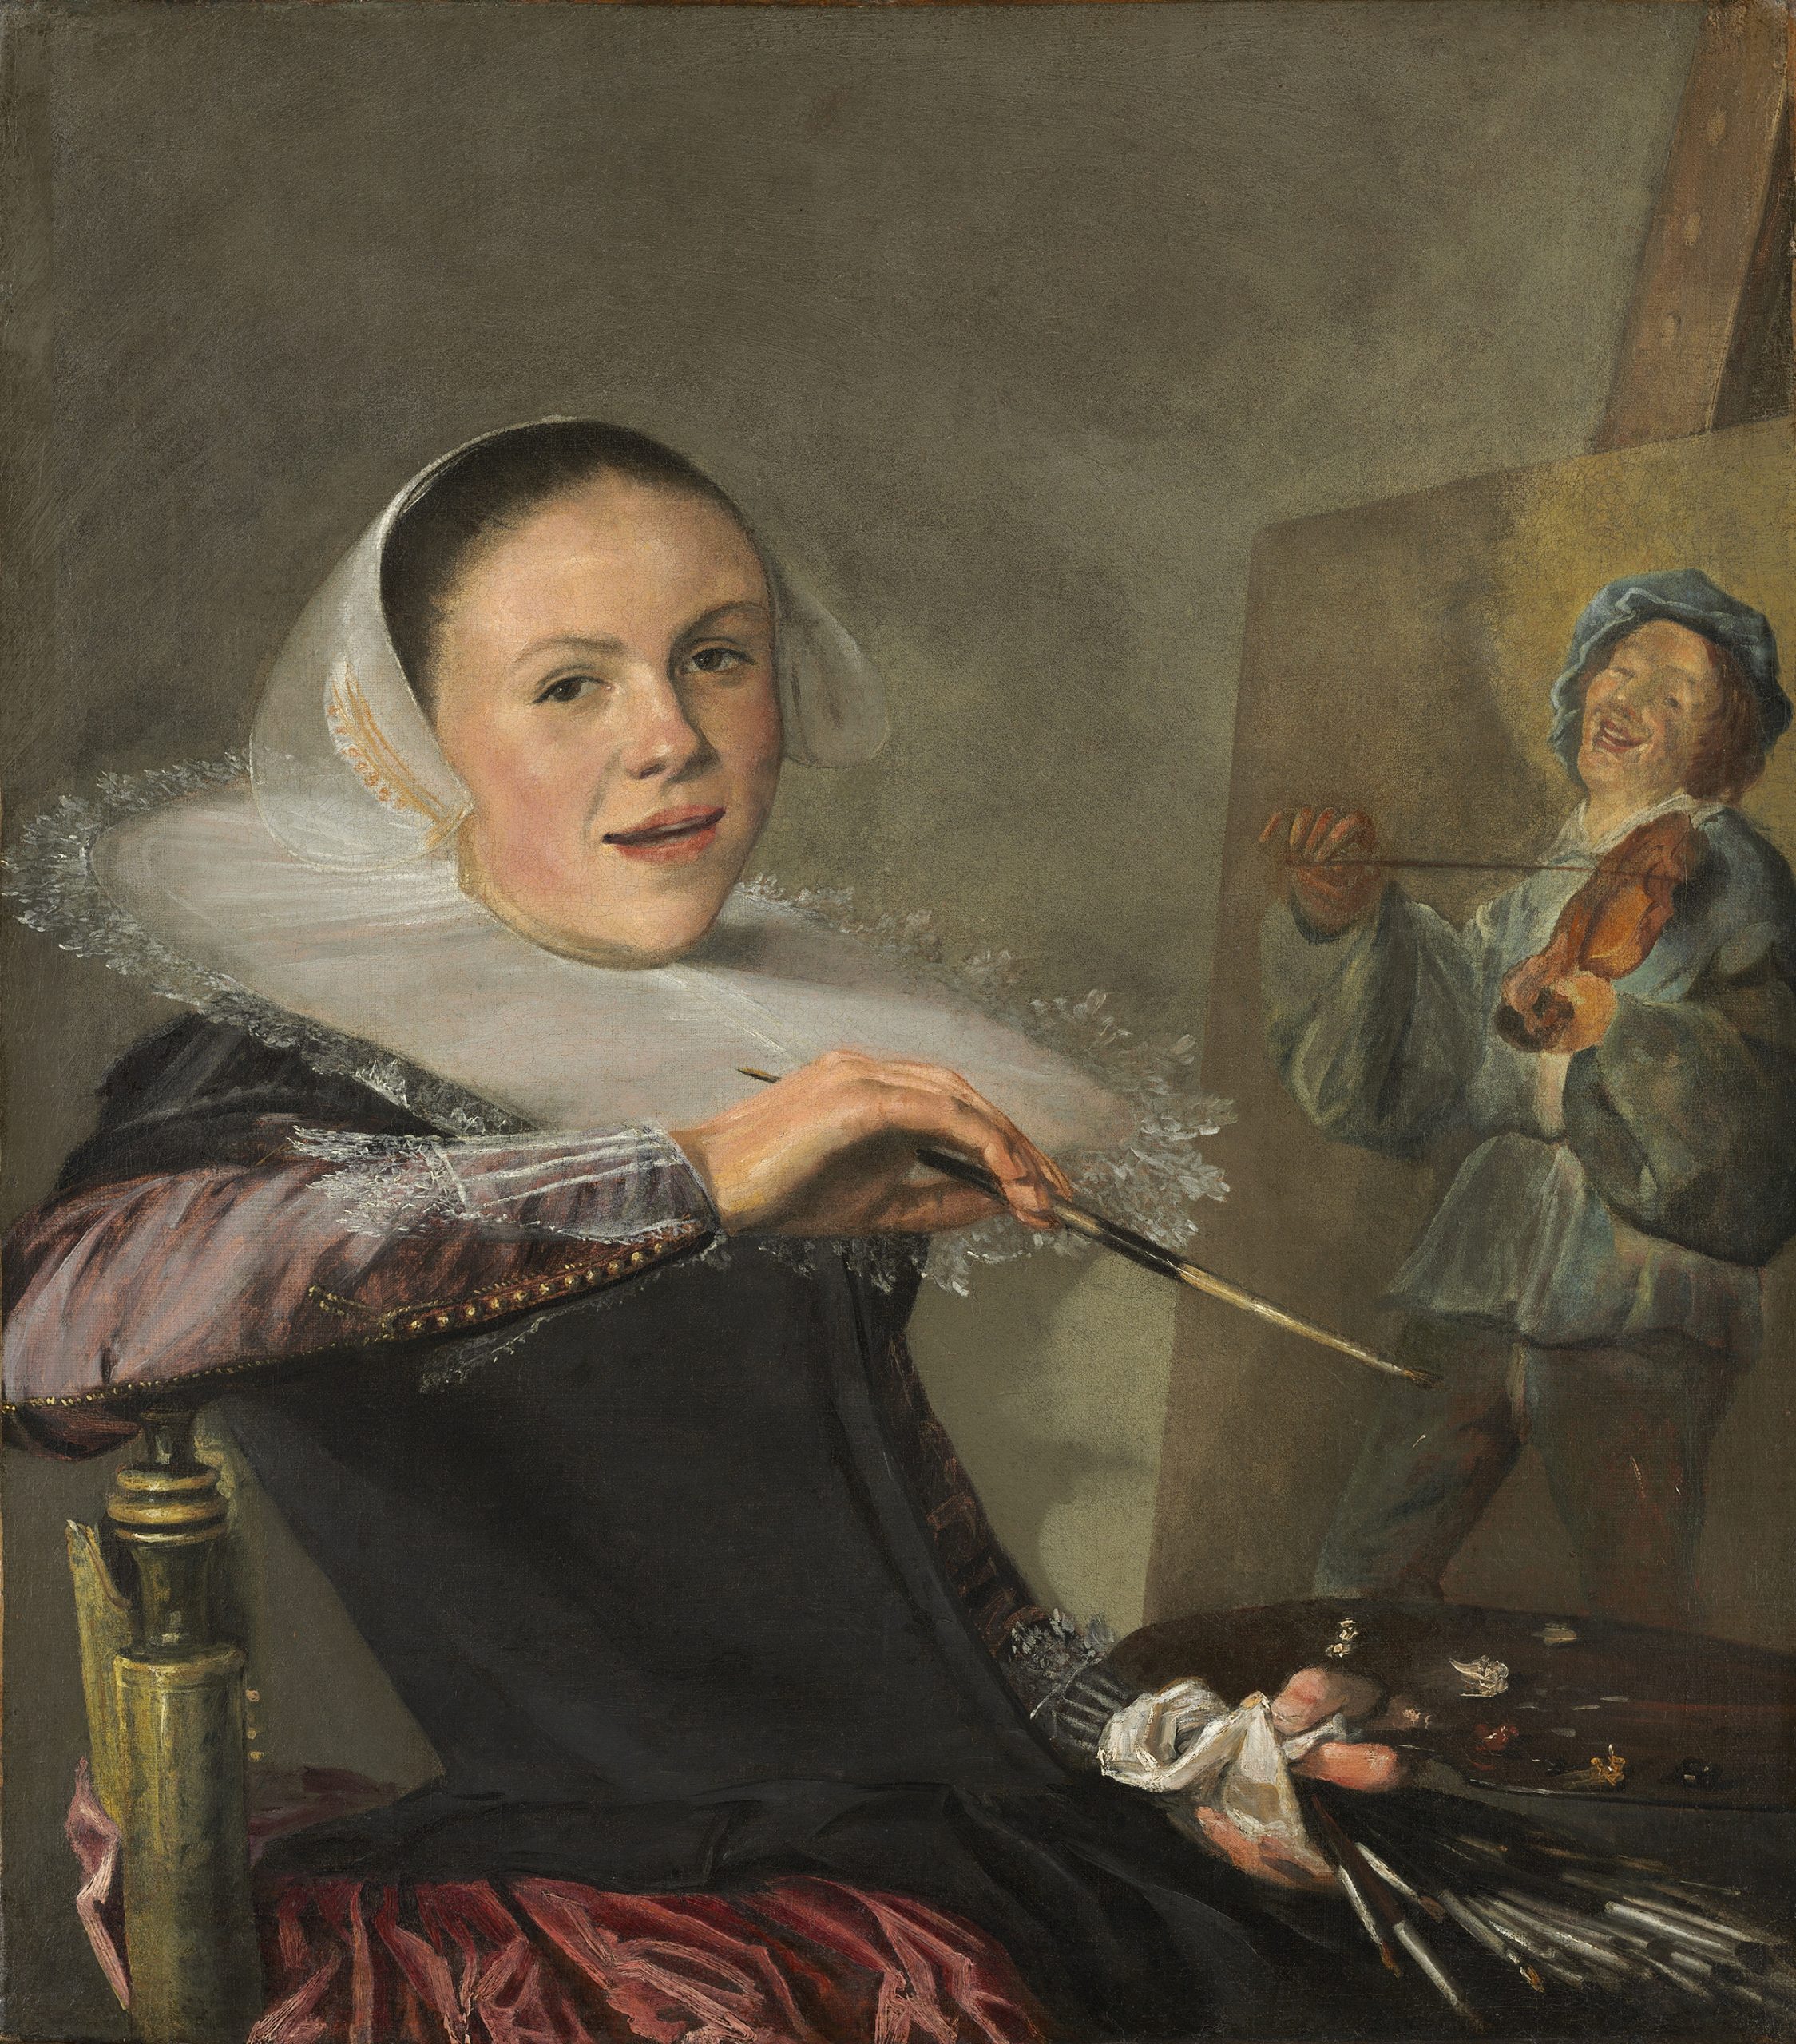 Judith Leyster, Self-Portrait, oil on canvas, ca. 1630 (National Gallery of Art, Washington D.C.). Photo by Gandalf's Gallery, CC BY-NC-SA 2.0.